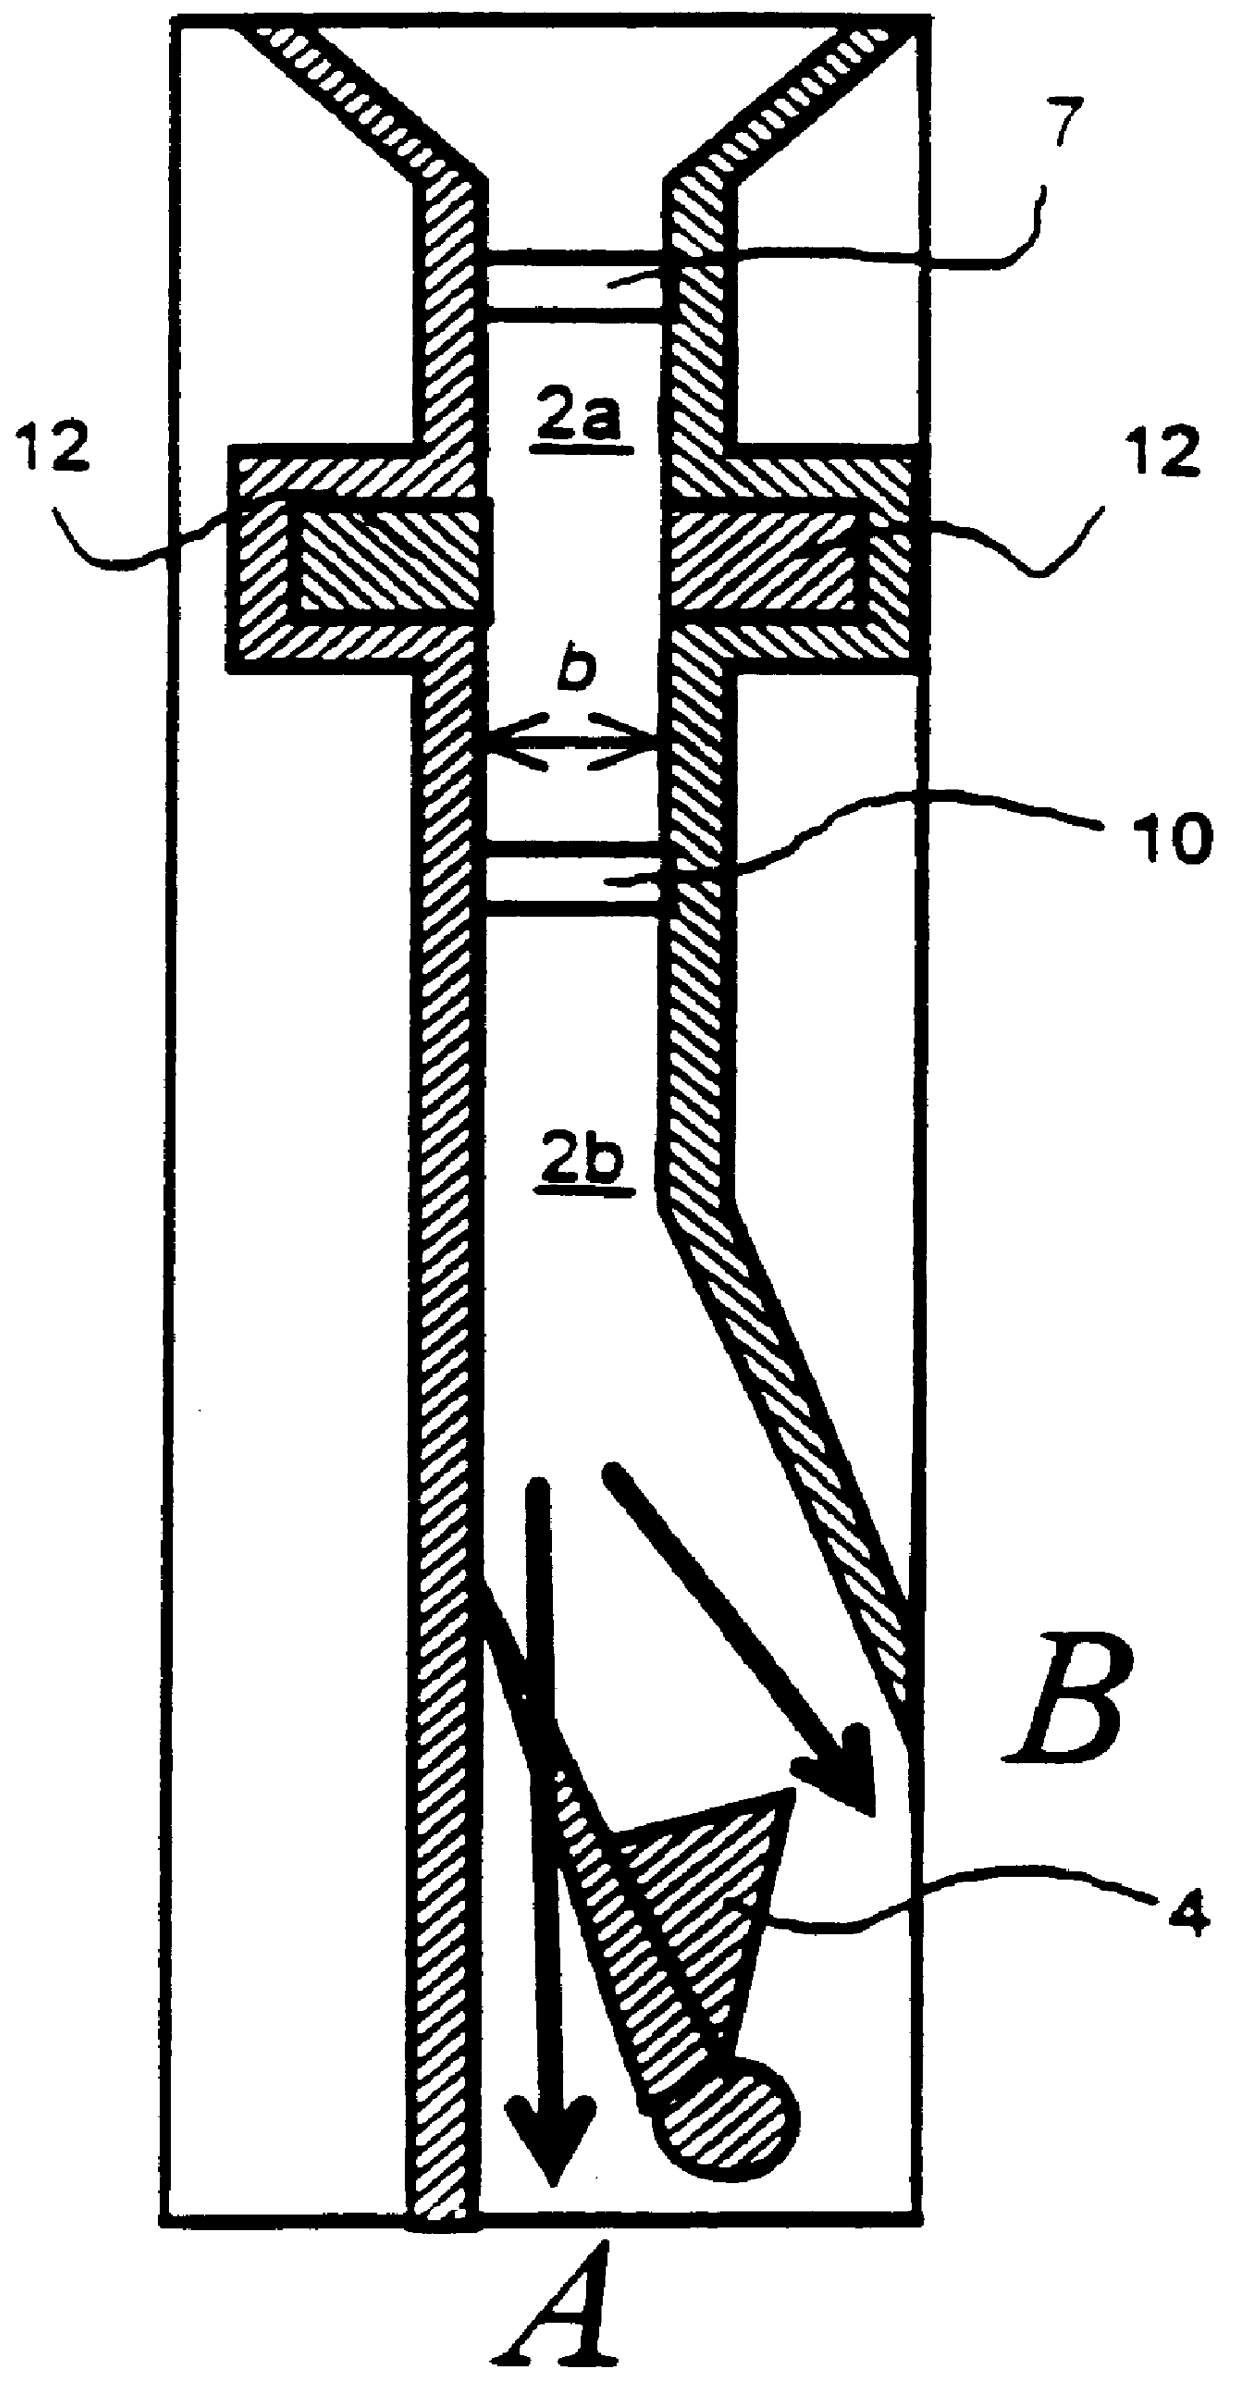 Apparatus and method for determining the validity of a coin